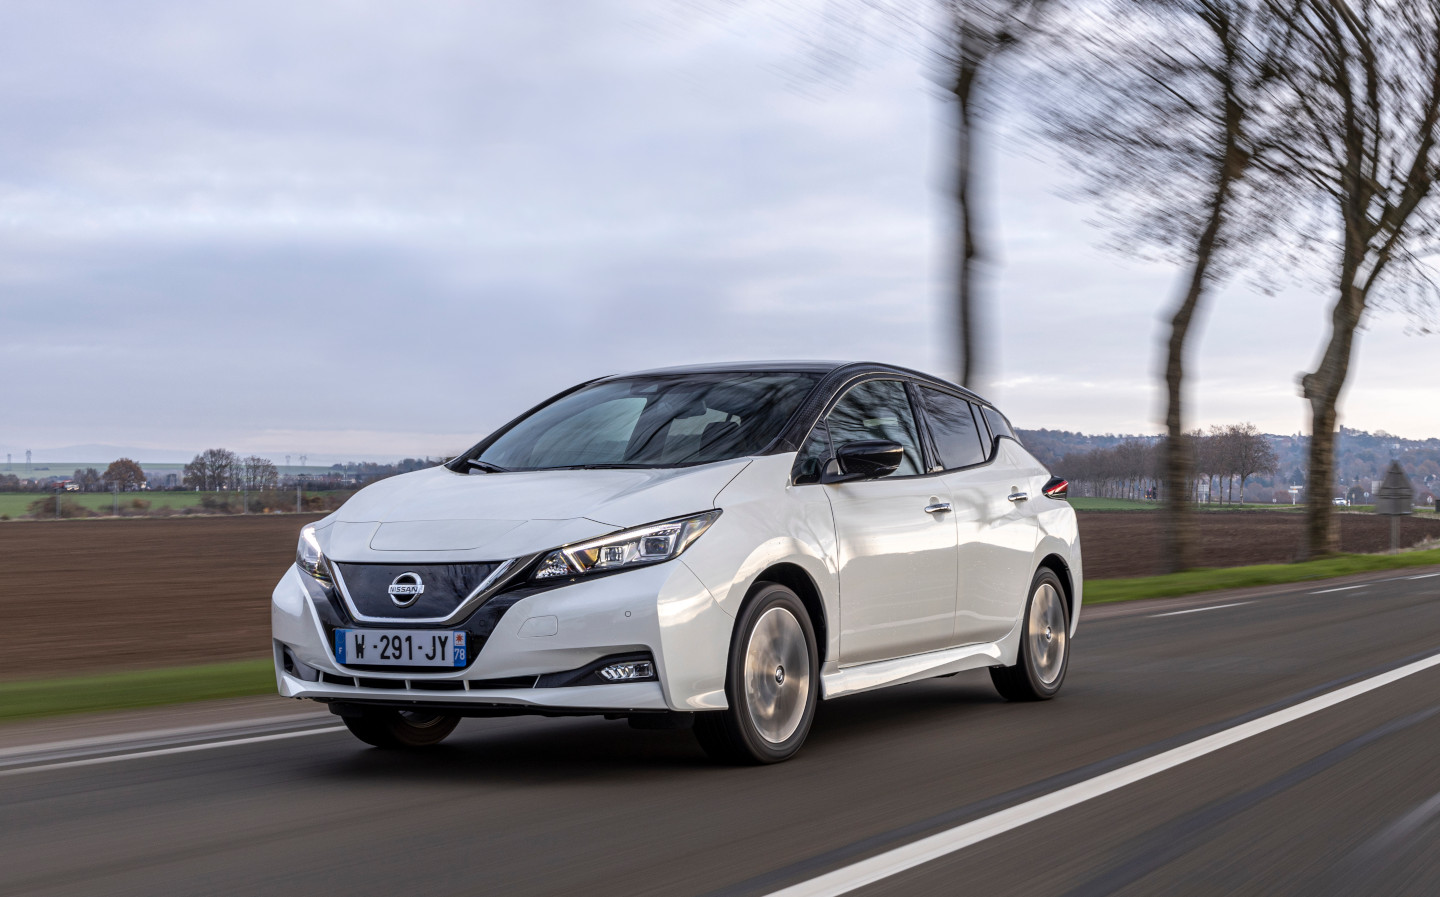 Nissan's Sunderland plant has produced more Leaf EVs than eighties Bluebirds